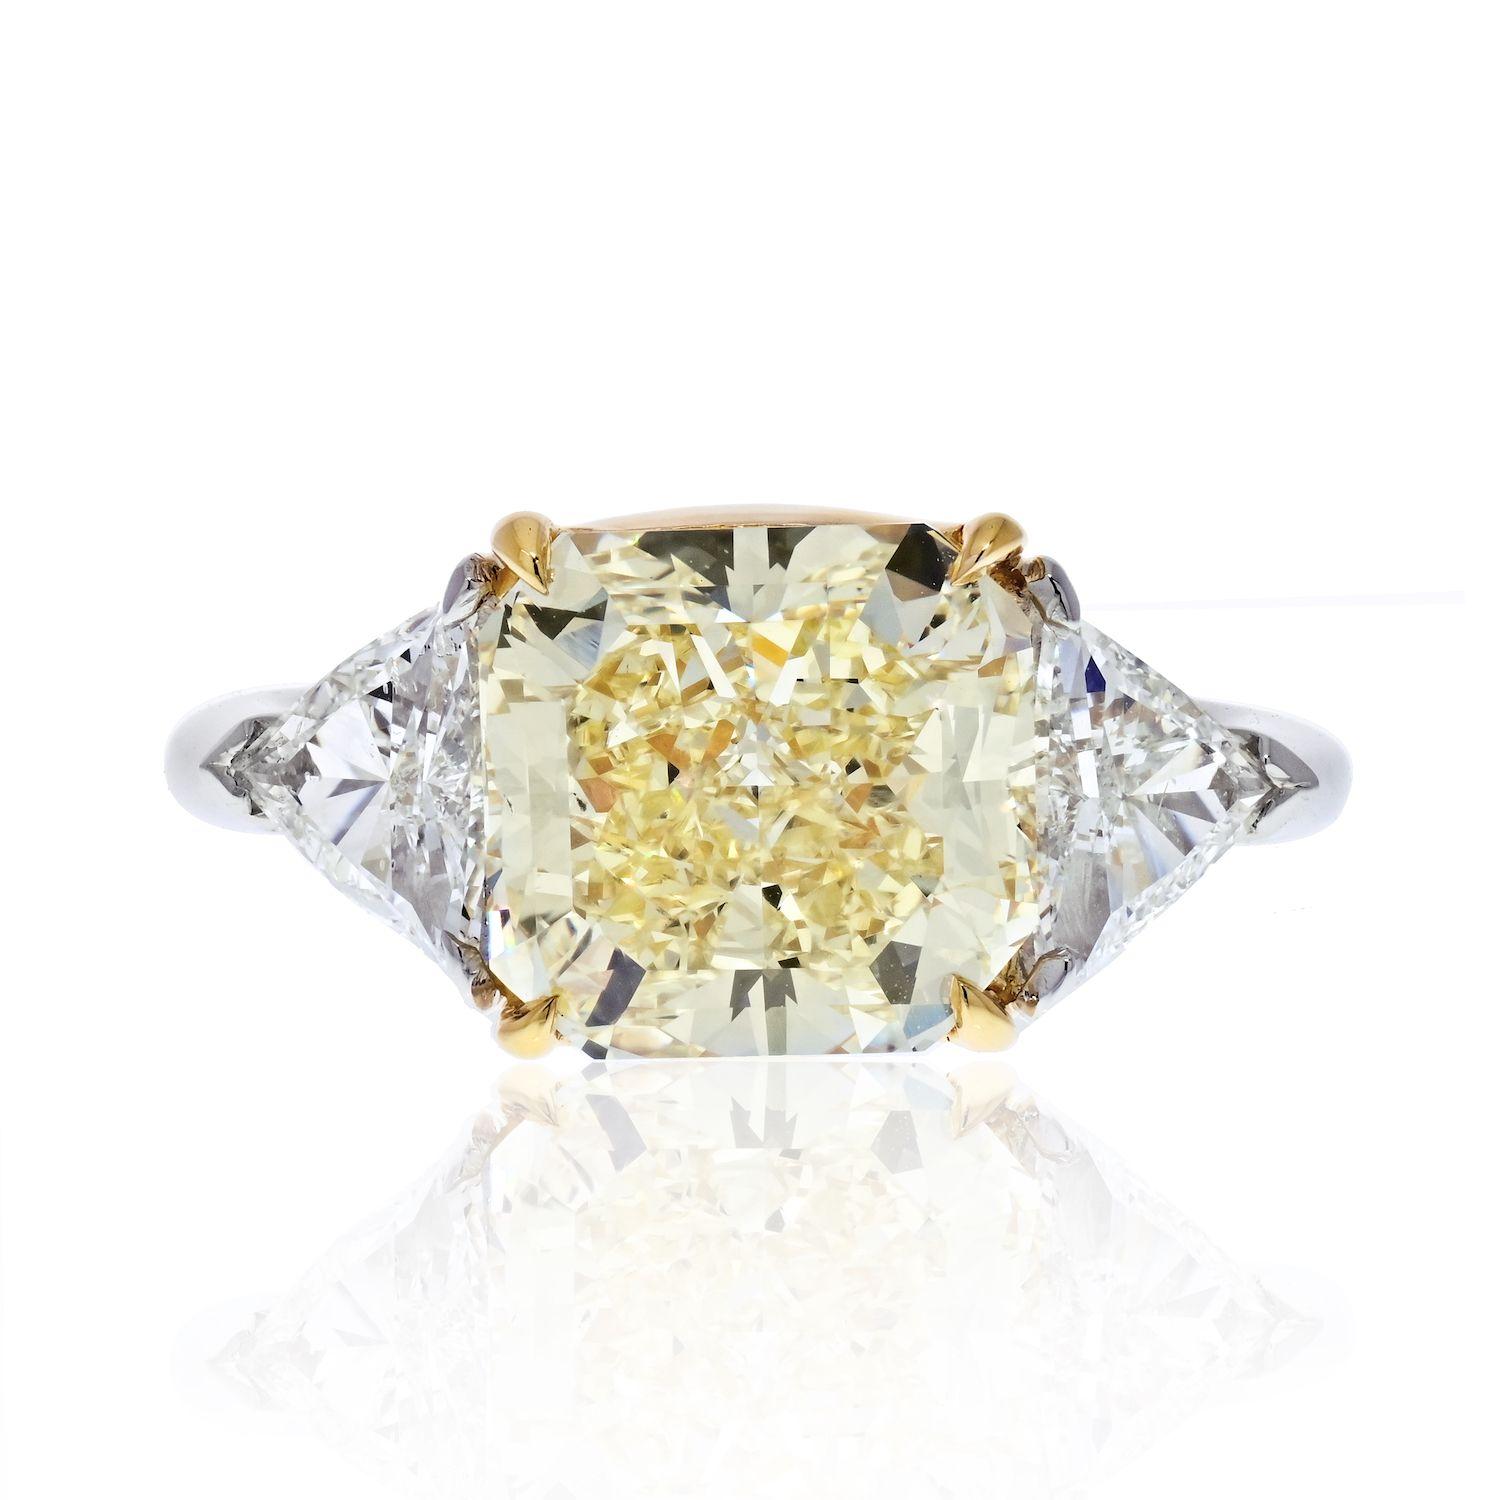 This is a beautiful three-stone diamond engagement ring crafted in Platinum set with a GIA certified four-carat radiant cut diamond. 

Center diamond is a 4.78 carat center diamond, radiant shape, this diamond is of a natural fancy yellow color and